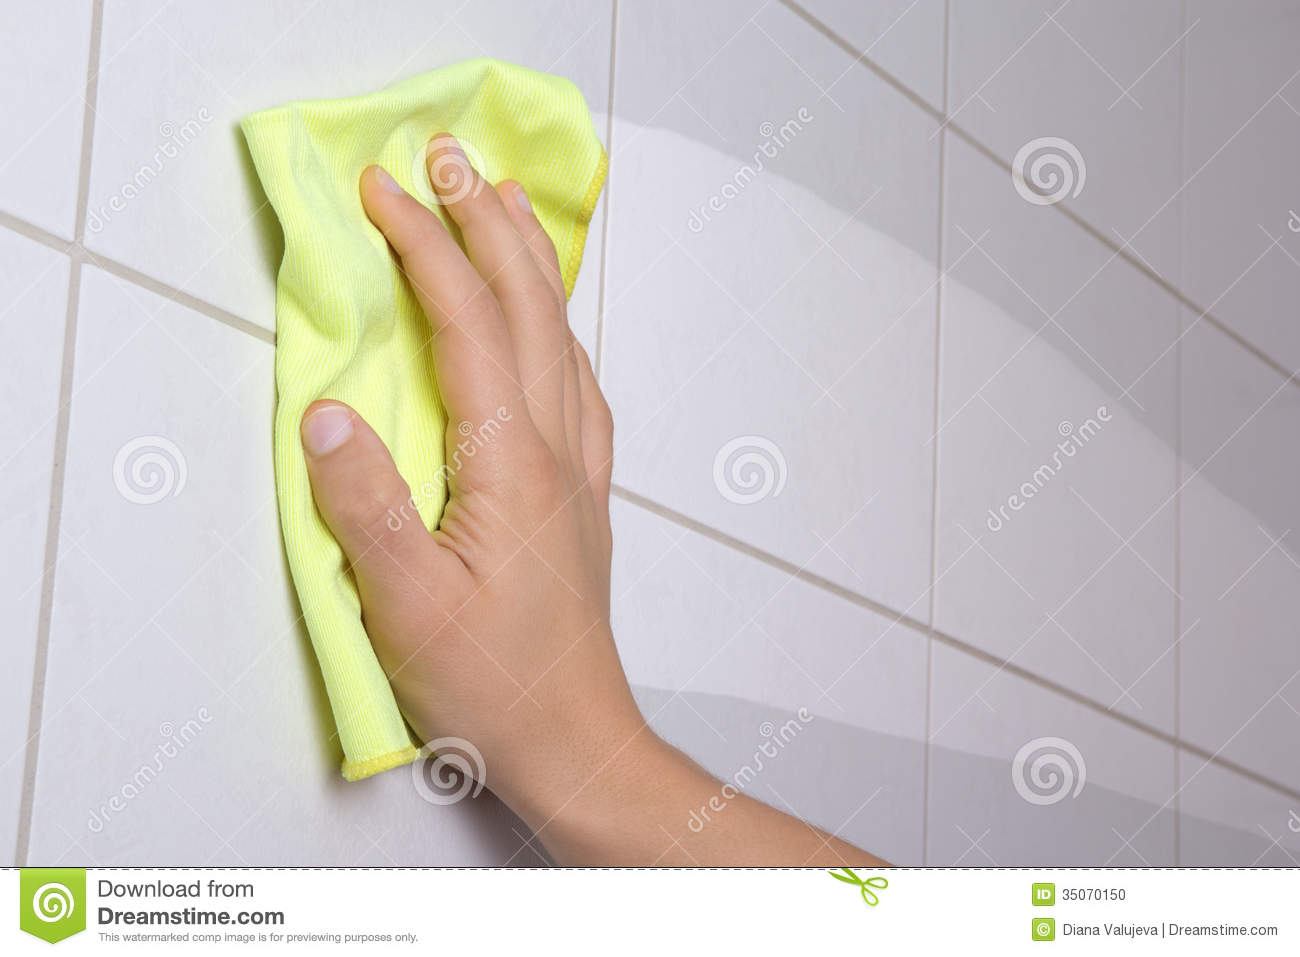 Dust Rag Clipart Hand With Yellow Rag Cleaning